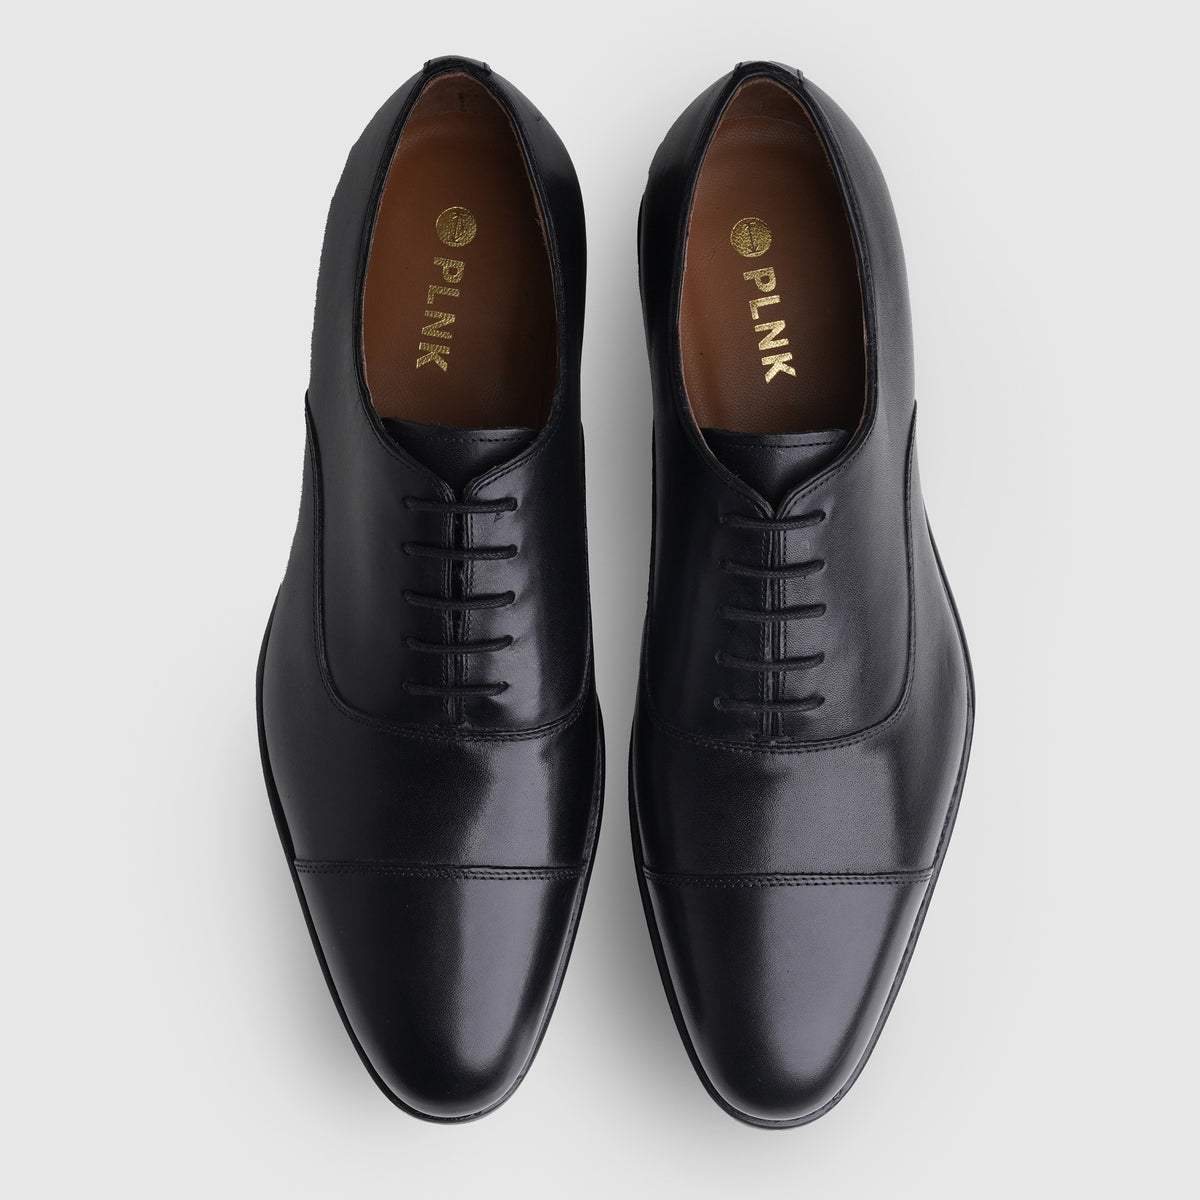 Captoe Oxfords Black 353 Goodyear Welted - PLNK Shoes